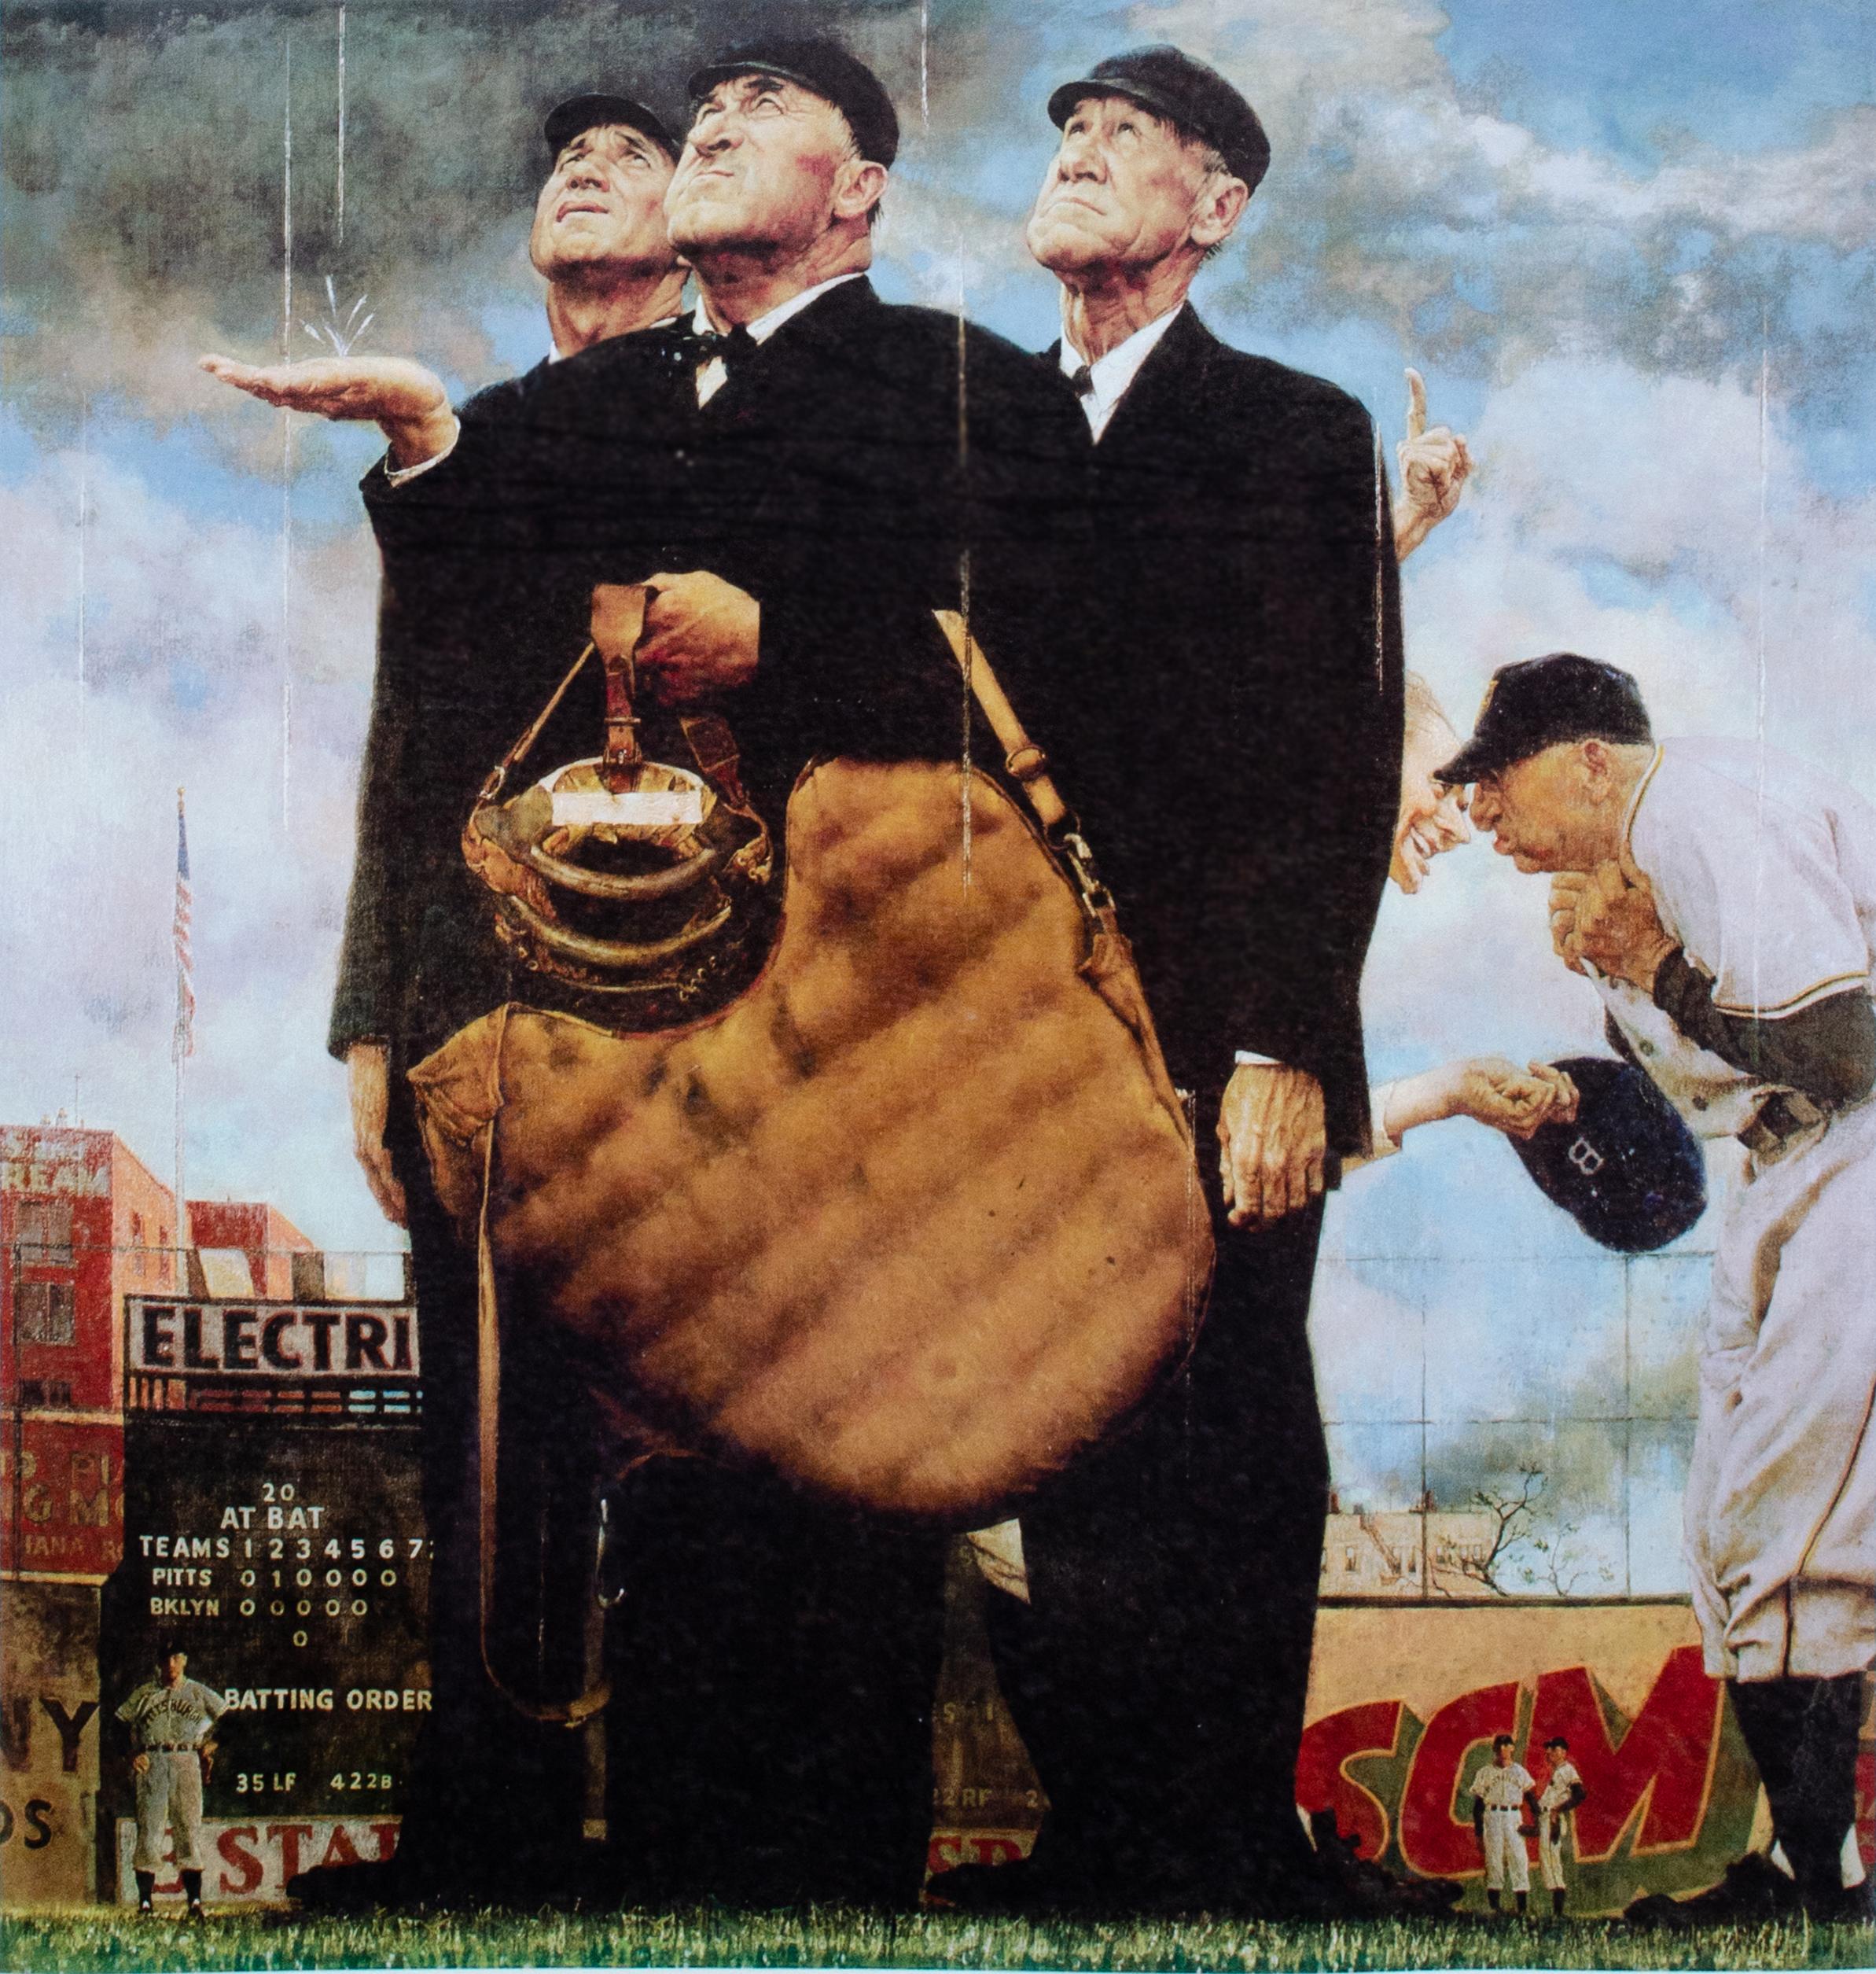 Norman Rockwell (American, 1894-1978)
Bottom of The Sixth
Original painting produced 1948, authorized postumous estate print produced 2005
Seriolithograph
Sight: 20 1/4 x 19 in.
Framed: 35 1/4 x 32 3/4 x 1 in.
Edition 417/500
Estate stamp lower